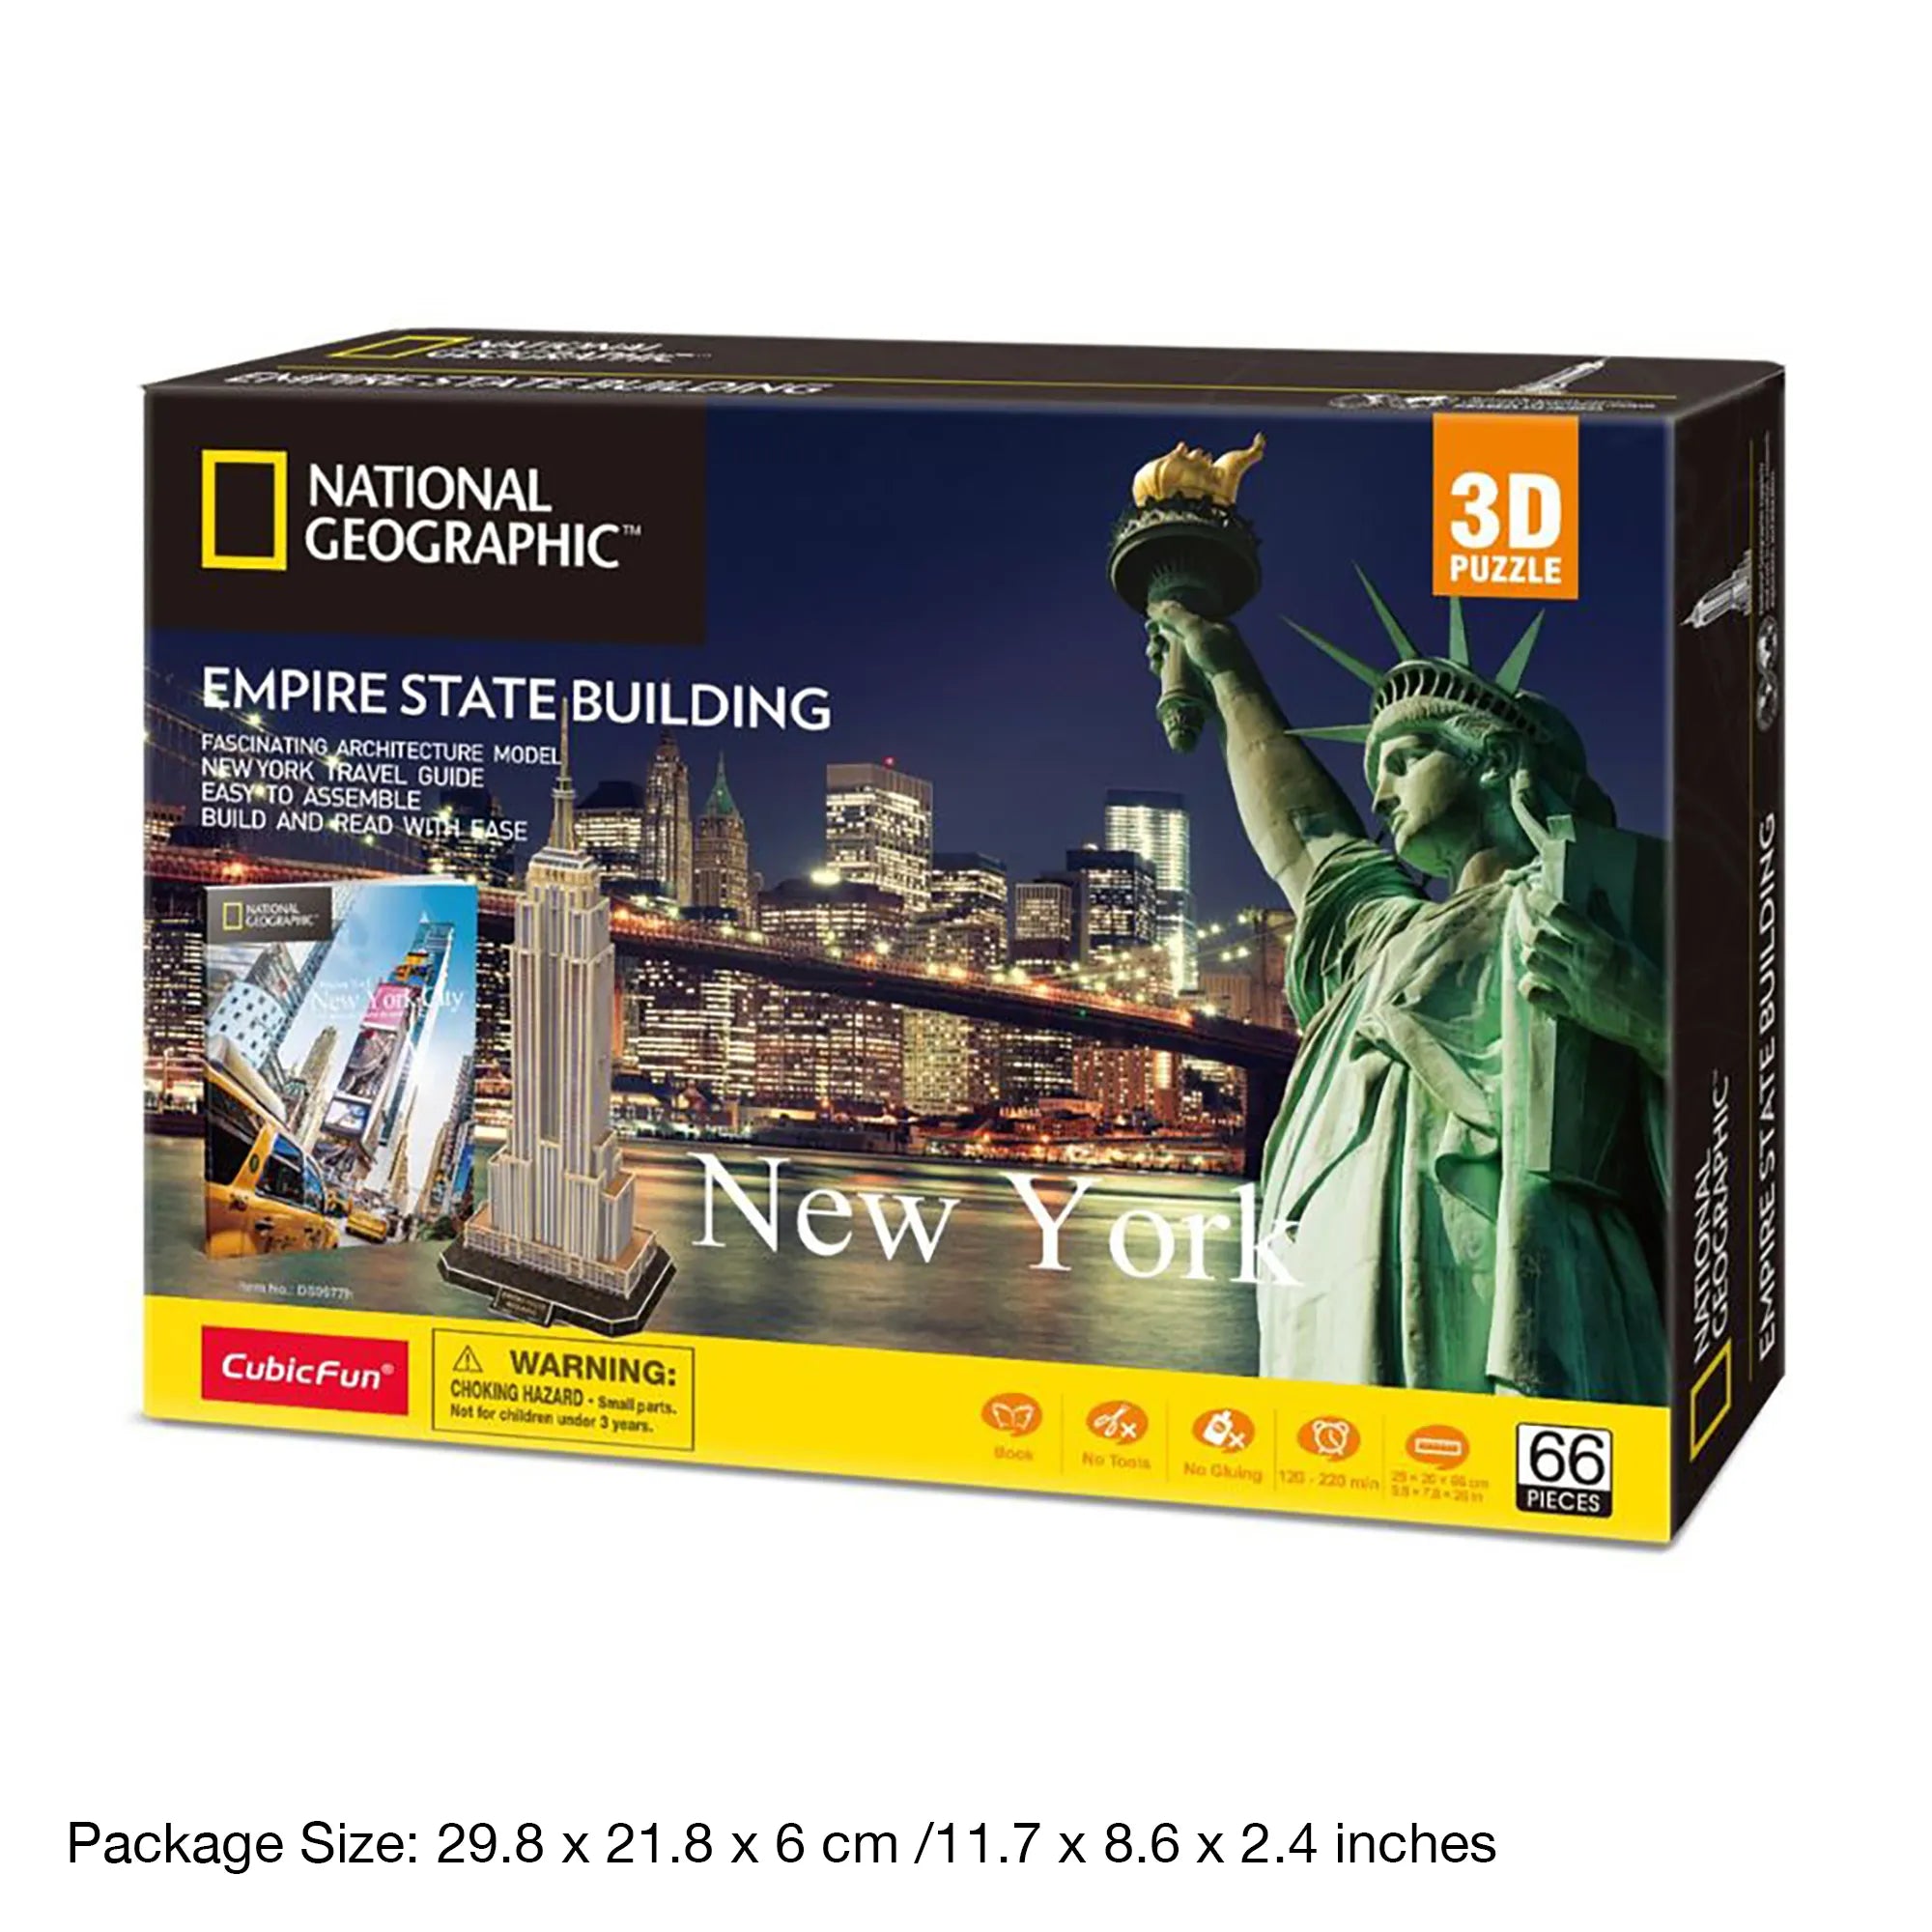 National Geographic Empire State Building 3D Puzzle - 66 Pcs - Ages 8-Adult - Brown's Hobby & Game